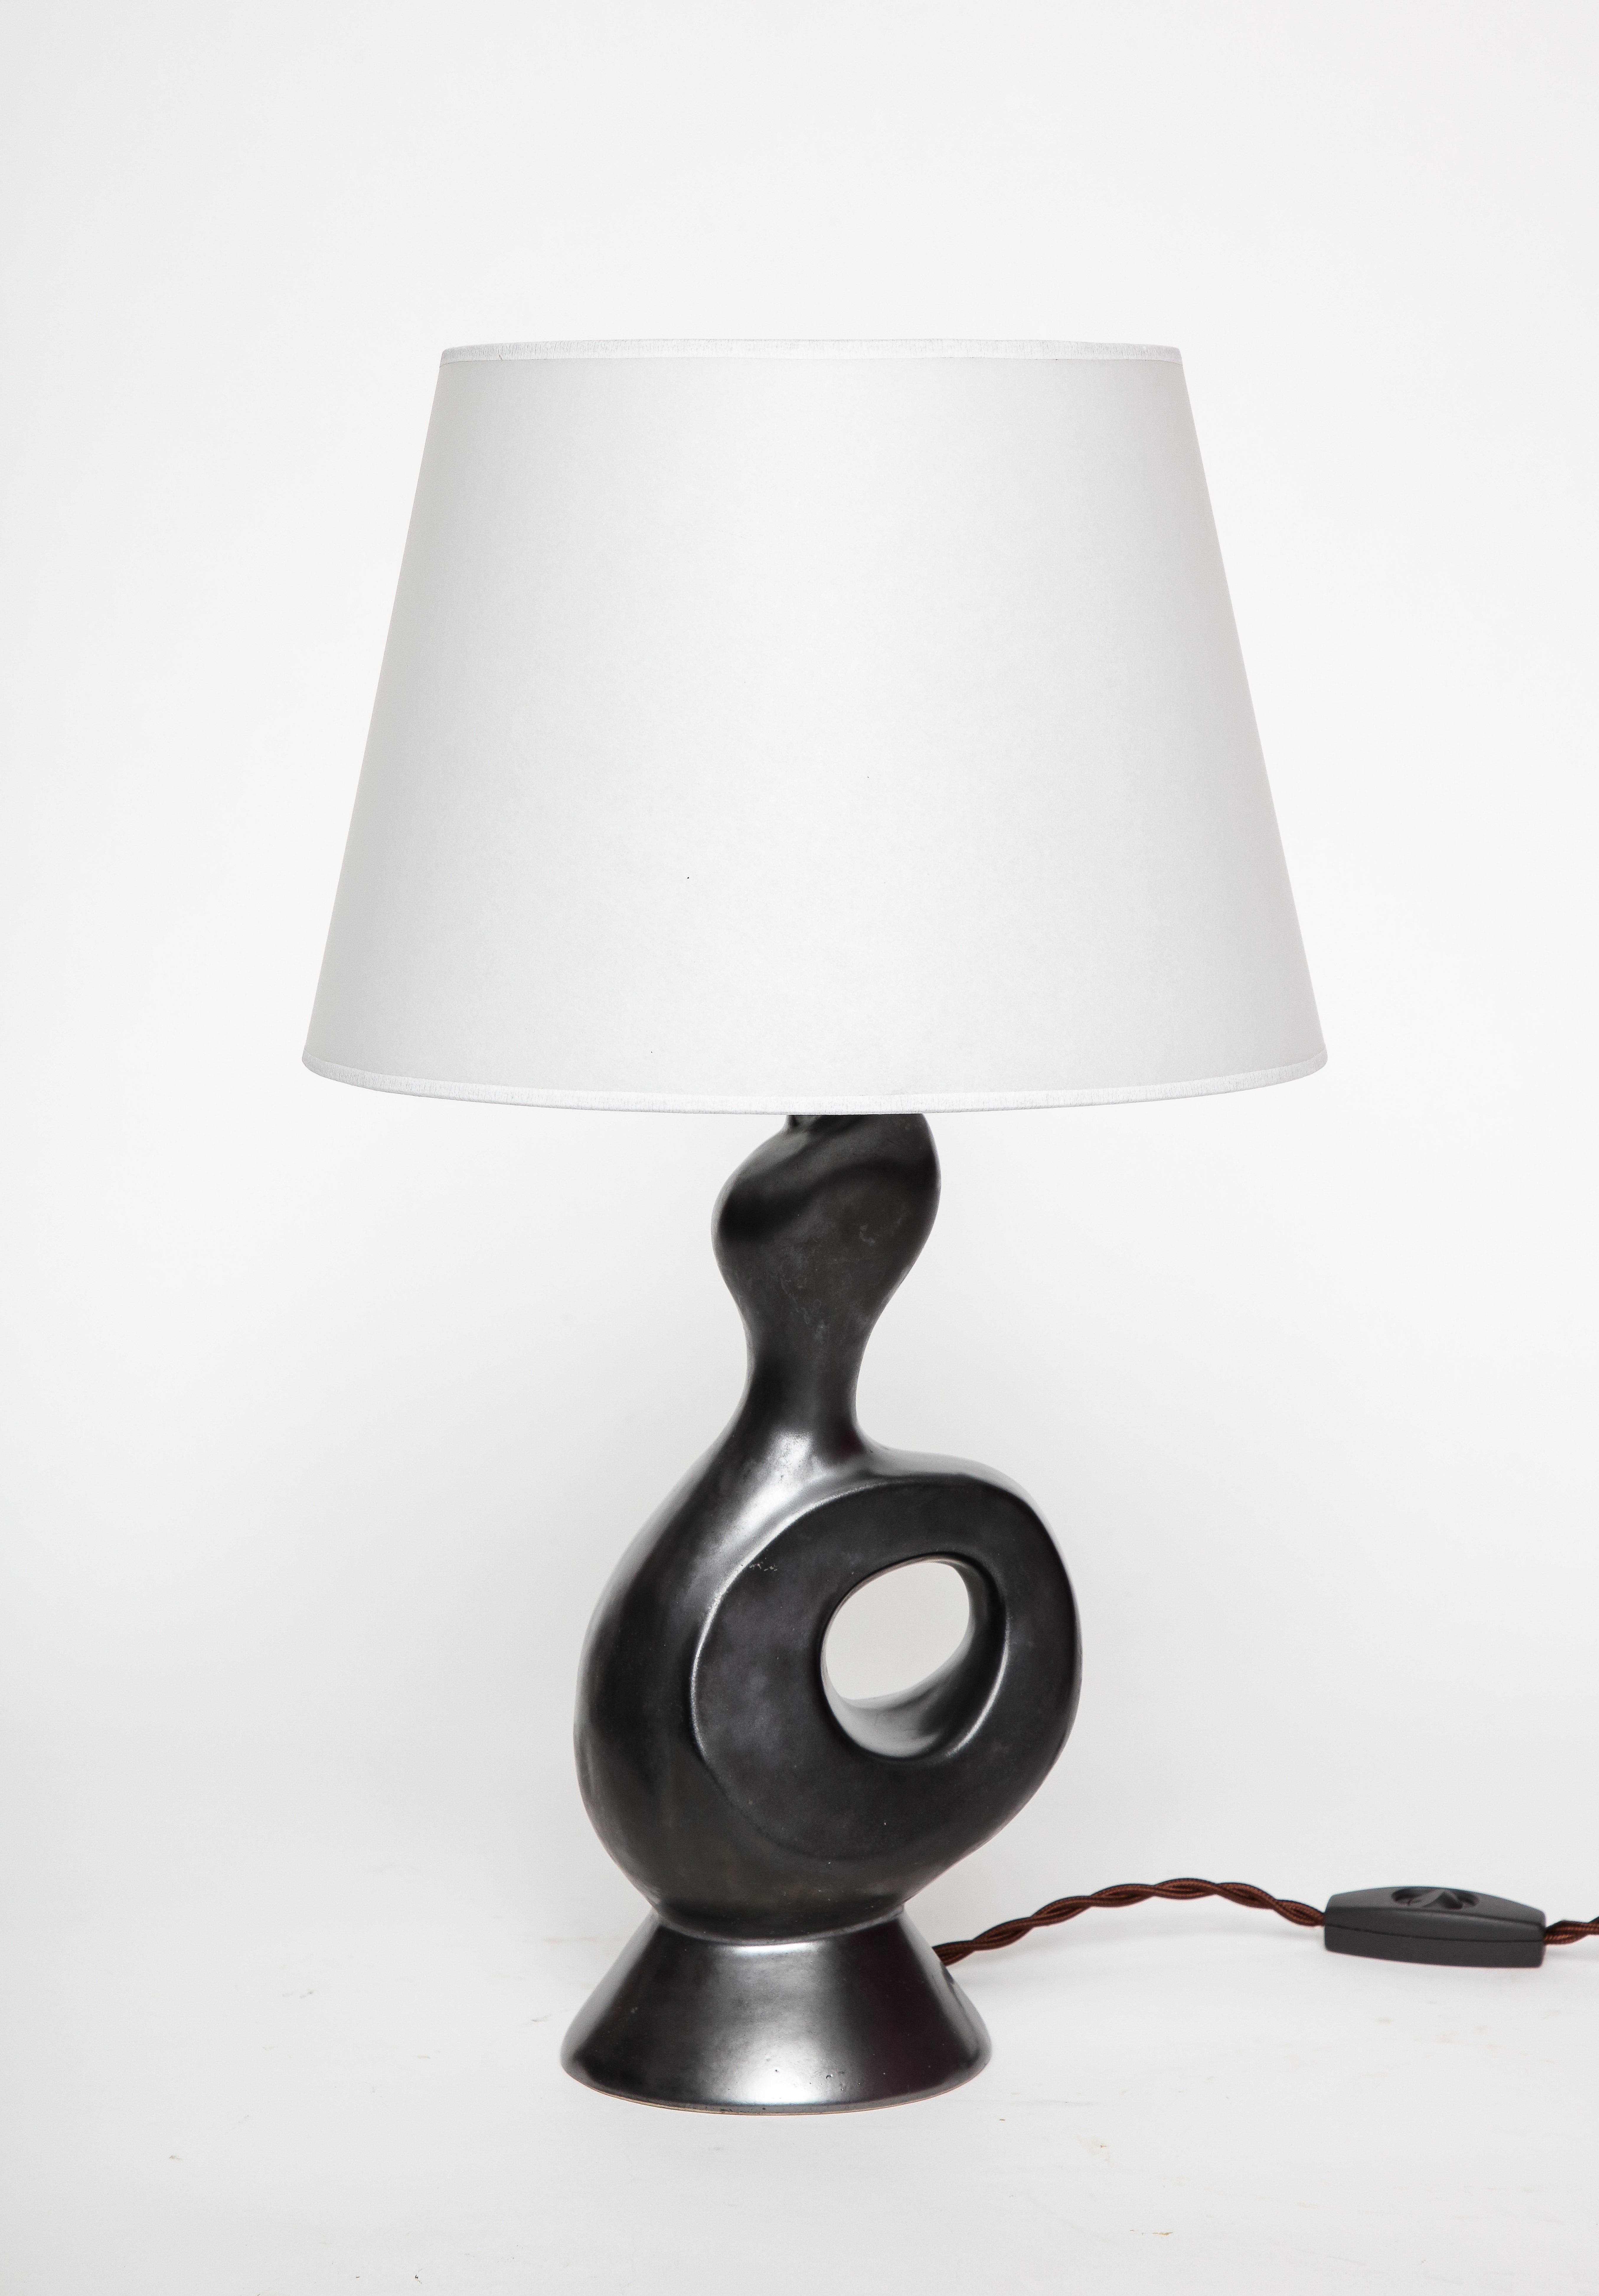 Gil Angoloni, ‘Bird' Black Glazed Ceramic Lamp w/ Parchment Shade. France, c. 1950, signed

Orleans Earthenware, France

